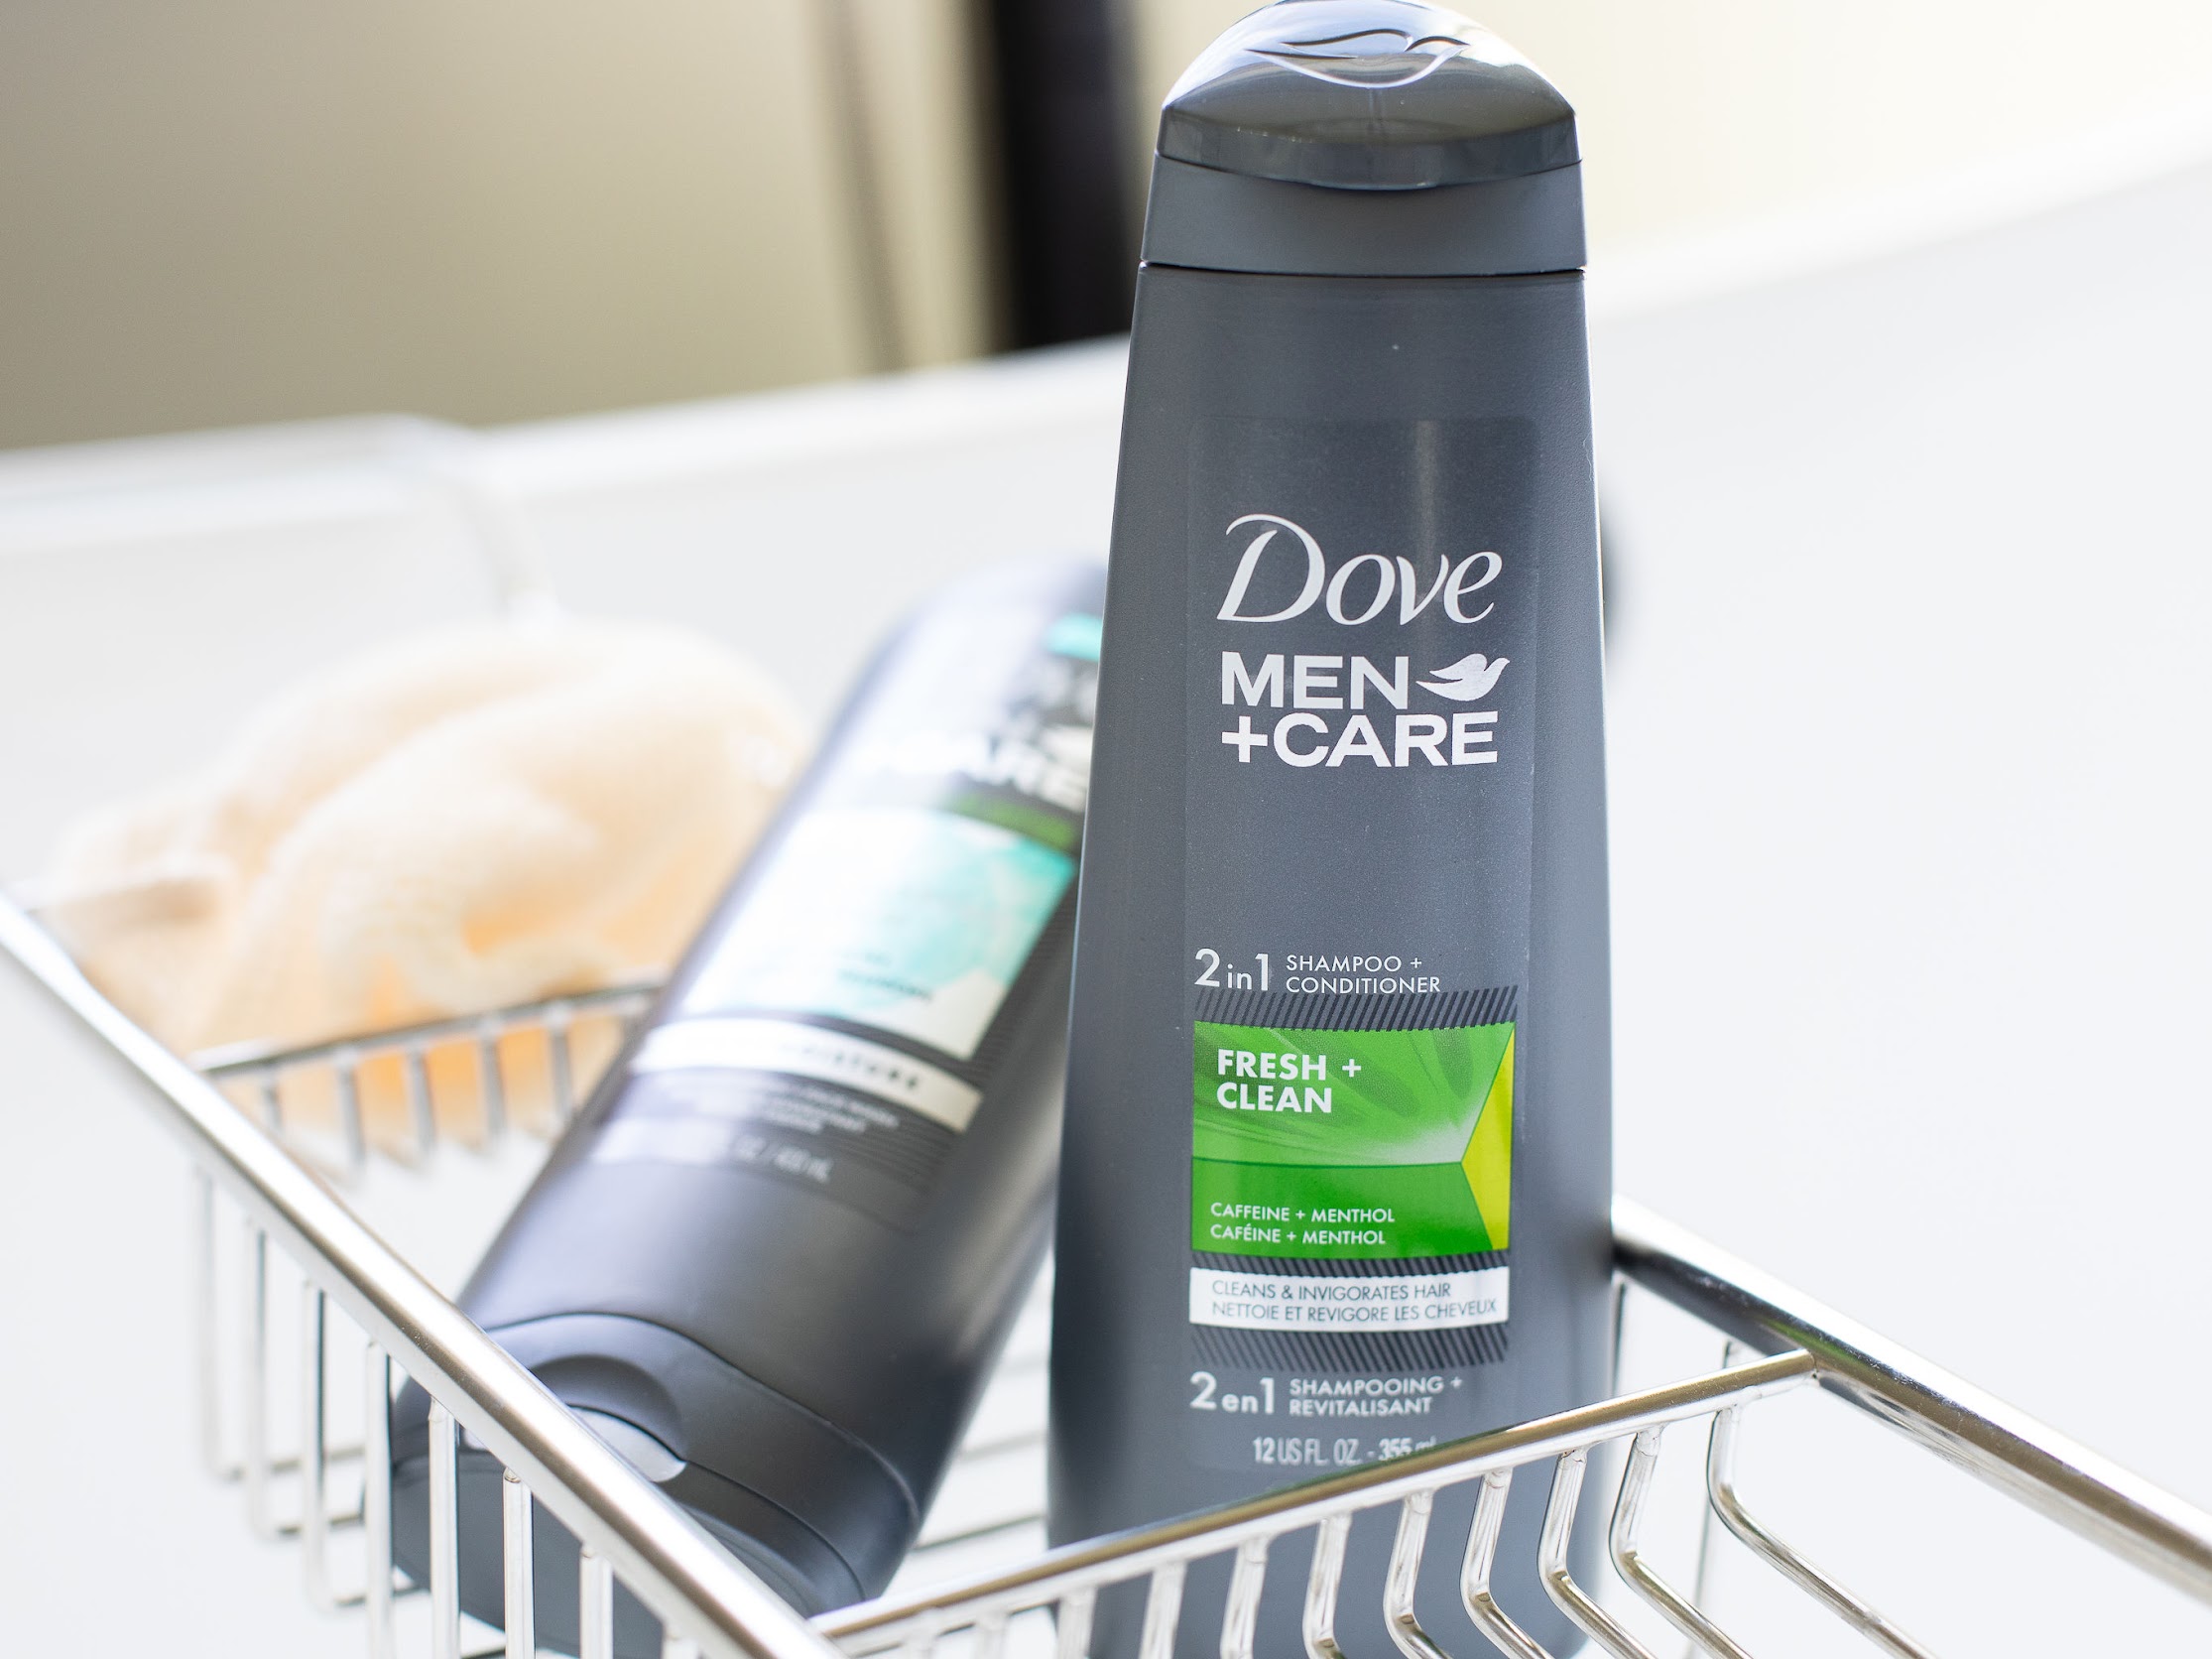 Dove Men+Care Hair Care Products As Low As $3.09 At Publix (Regular Price $5.59) on I Heart Publix